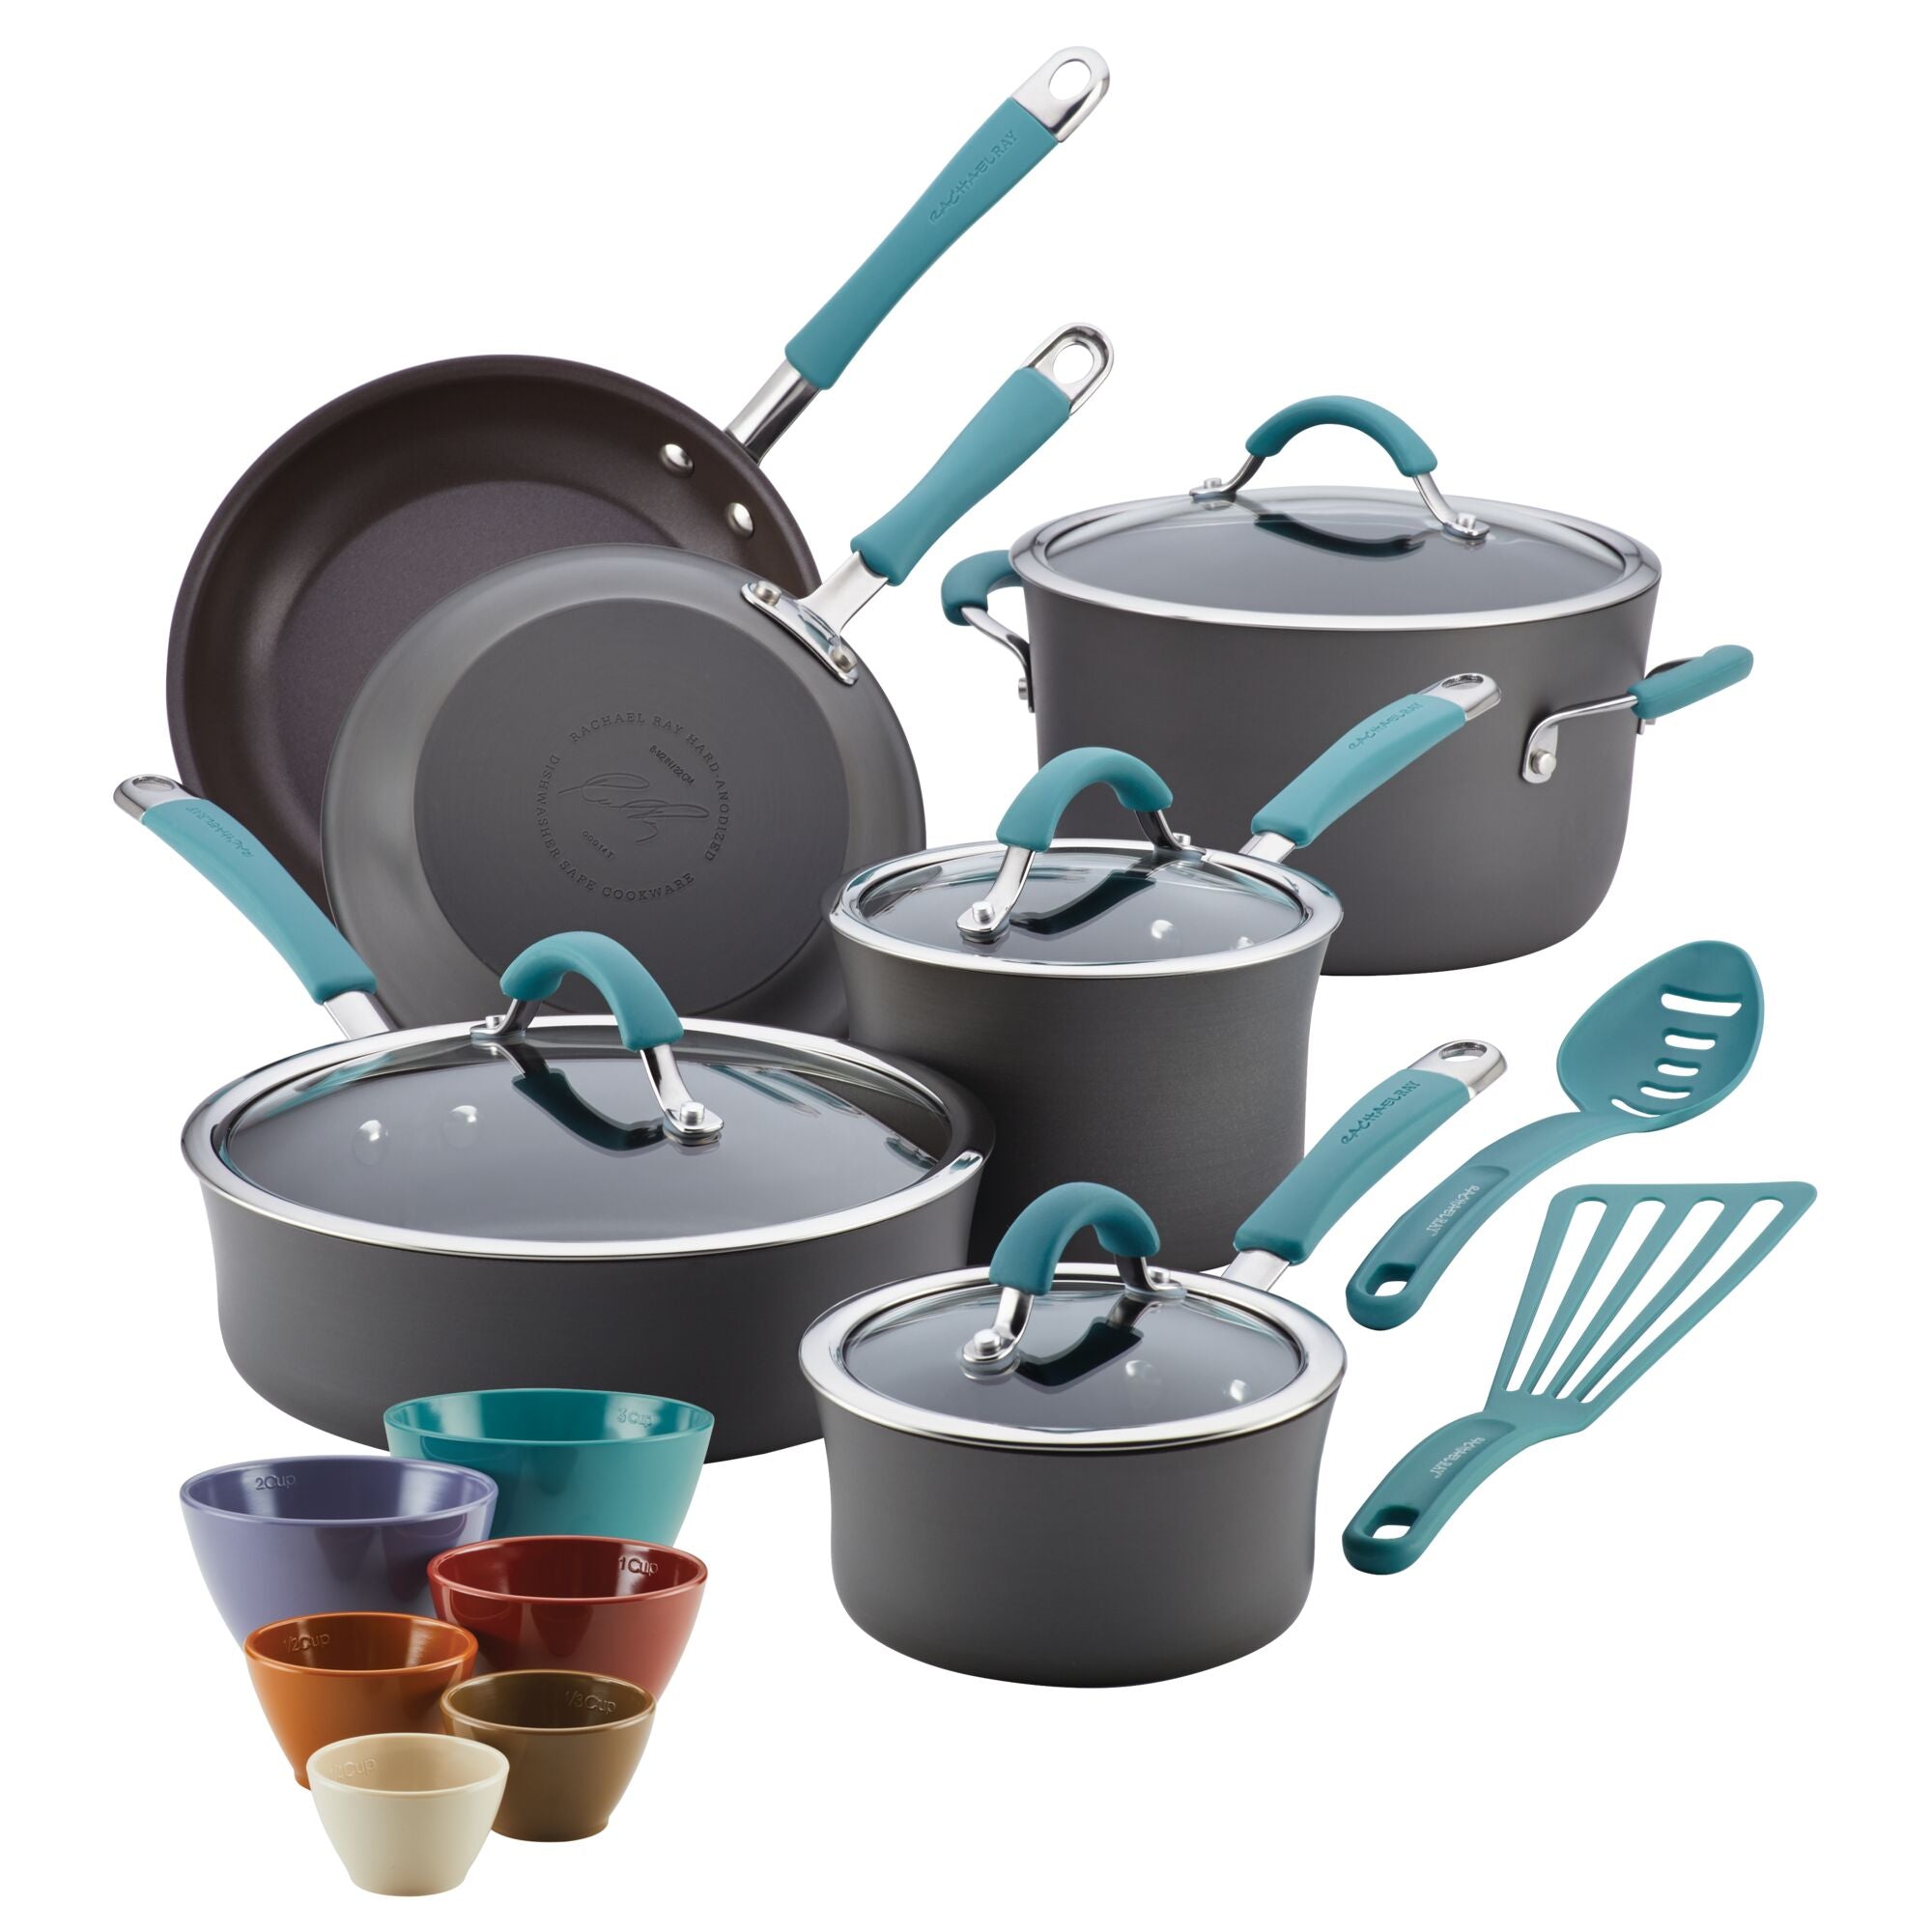 18-Piece Hard-Anodized Nonstick Cookware and Prep Bowl Set